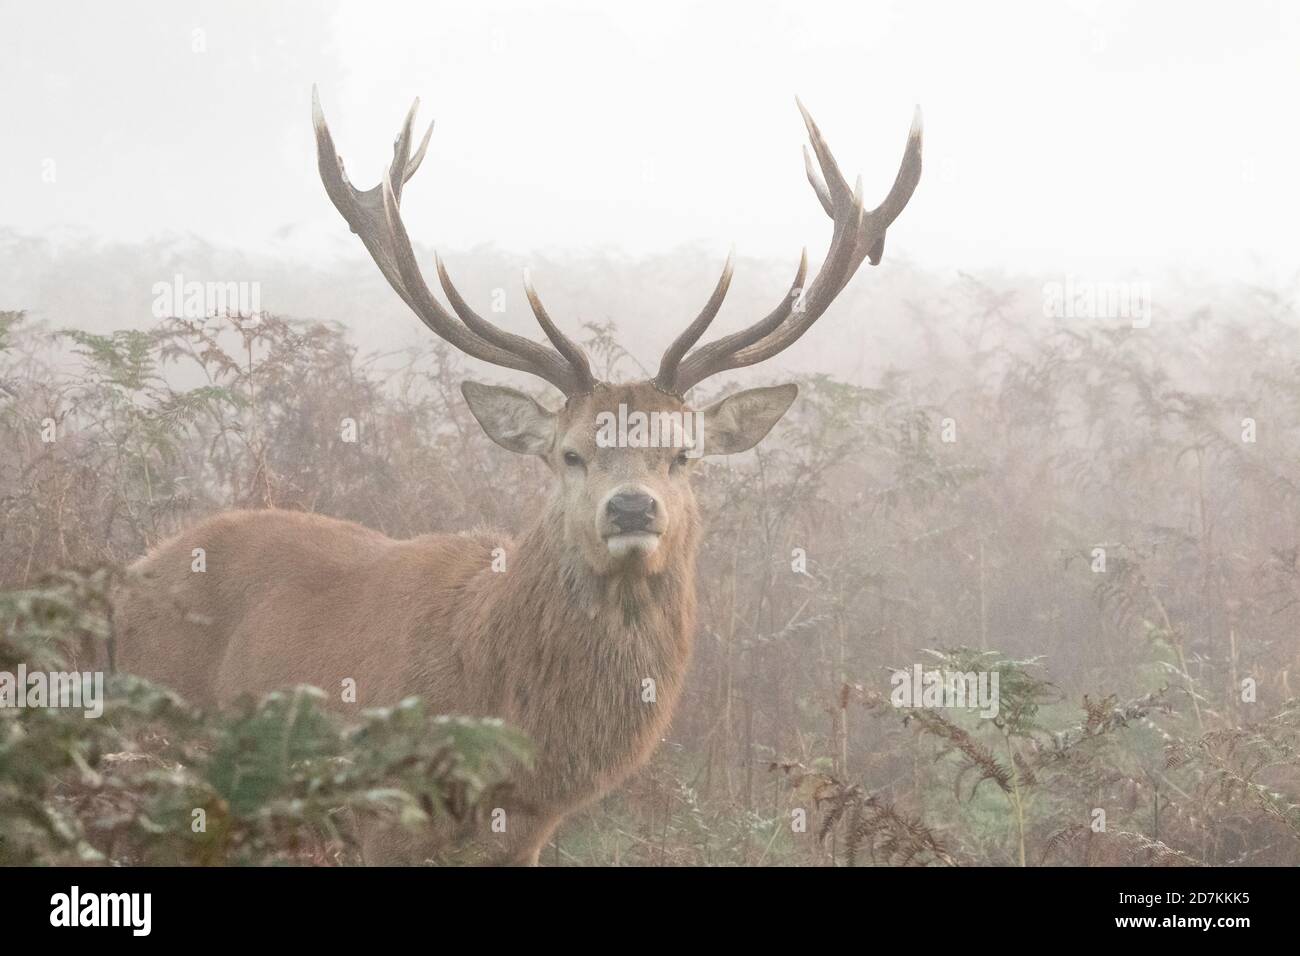 A red deer stag stands arrogantly in the early morning mist of learly Autumn, in Bushy Park, West London Stock Photo